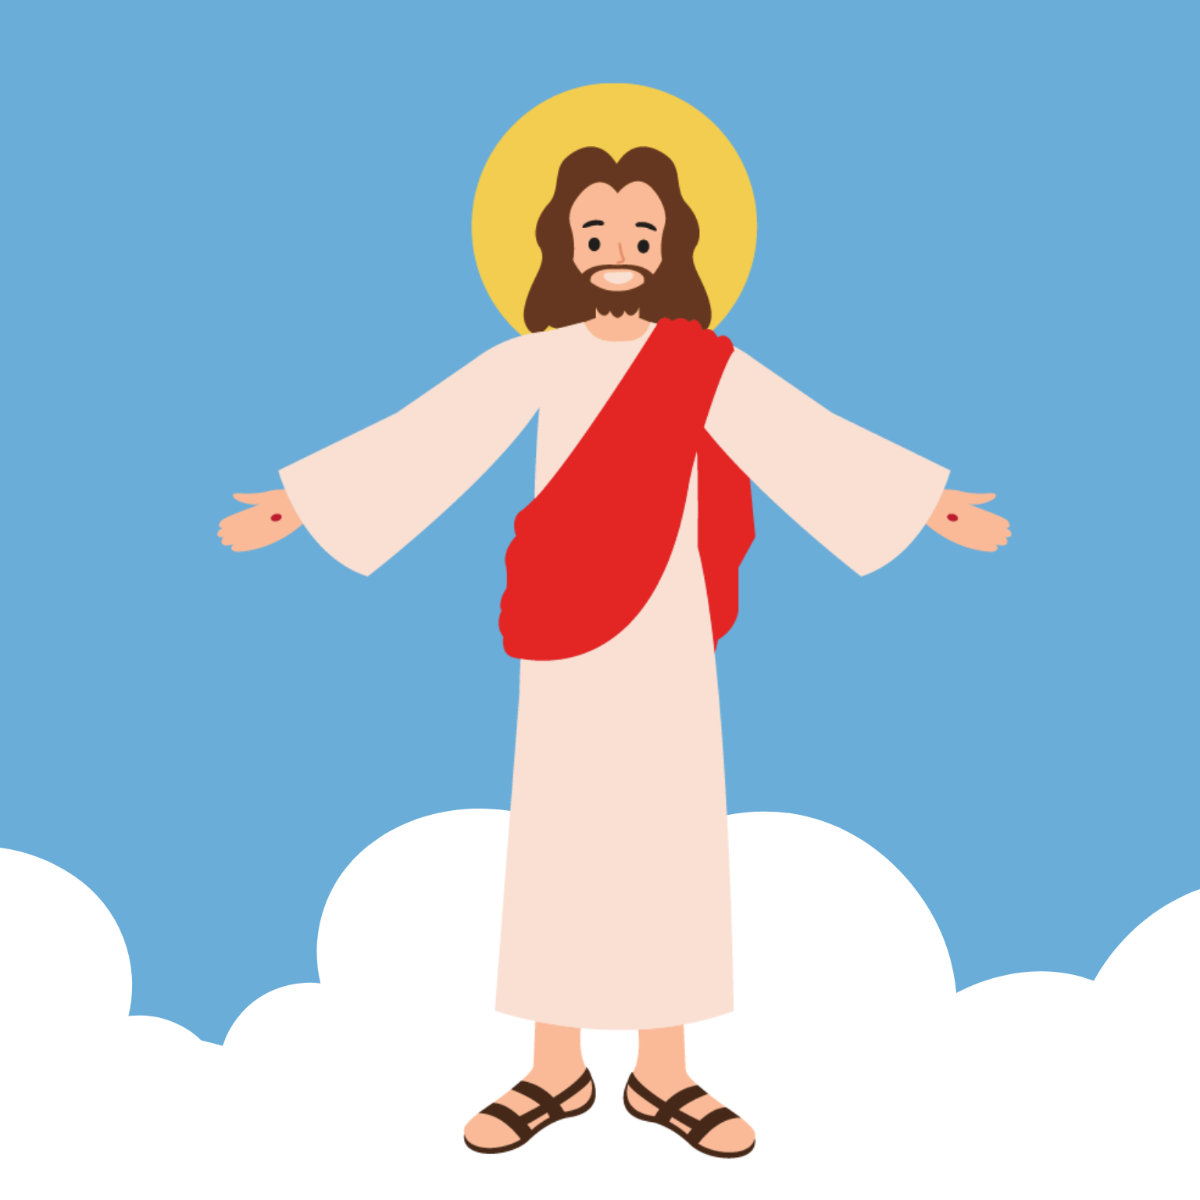 Free Ascension Day Illustration Template